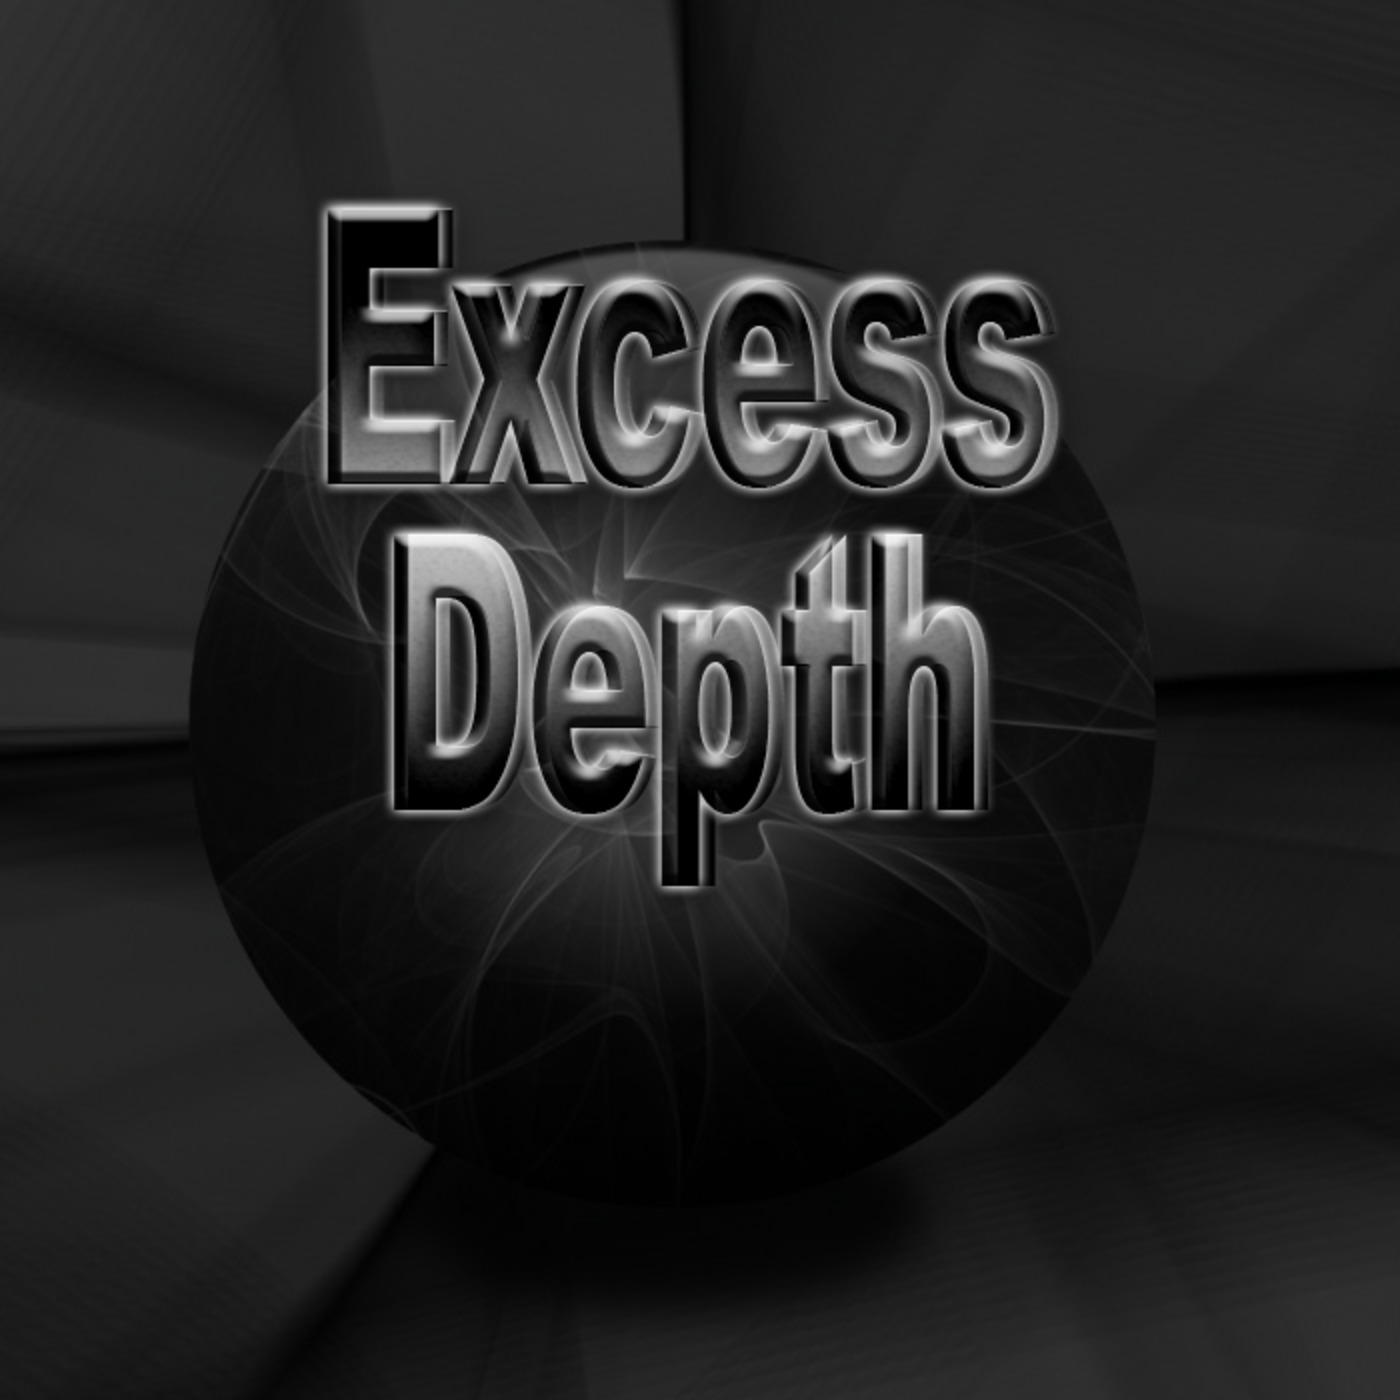 Excess Depth- Abysmal Frequencies